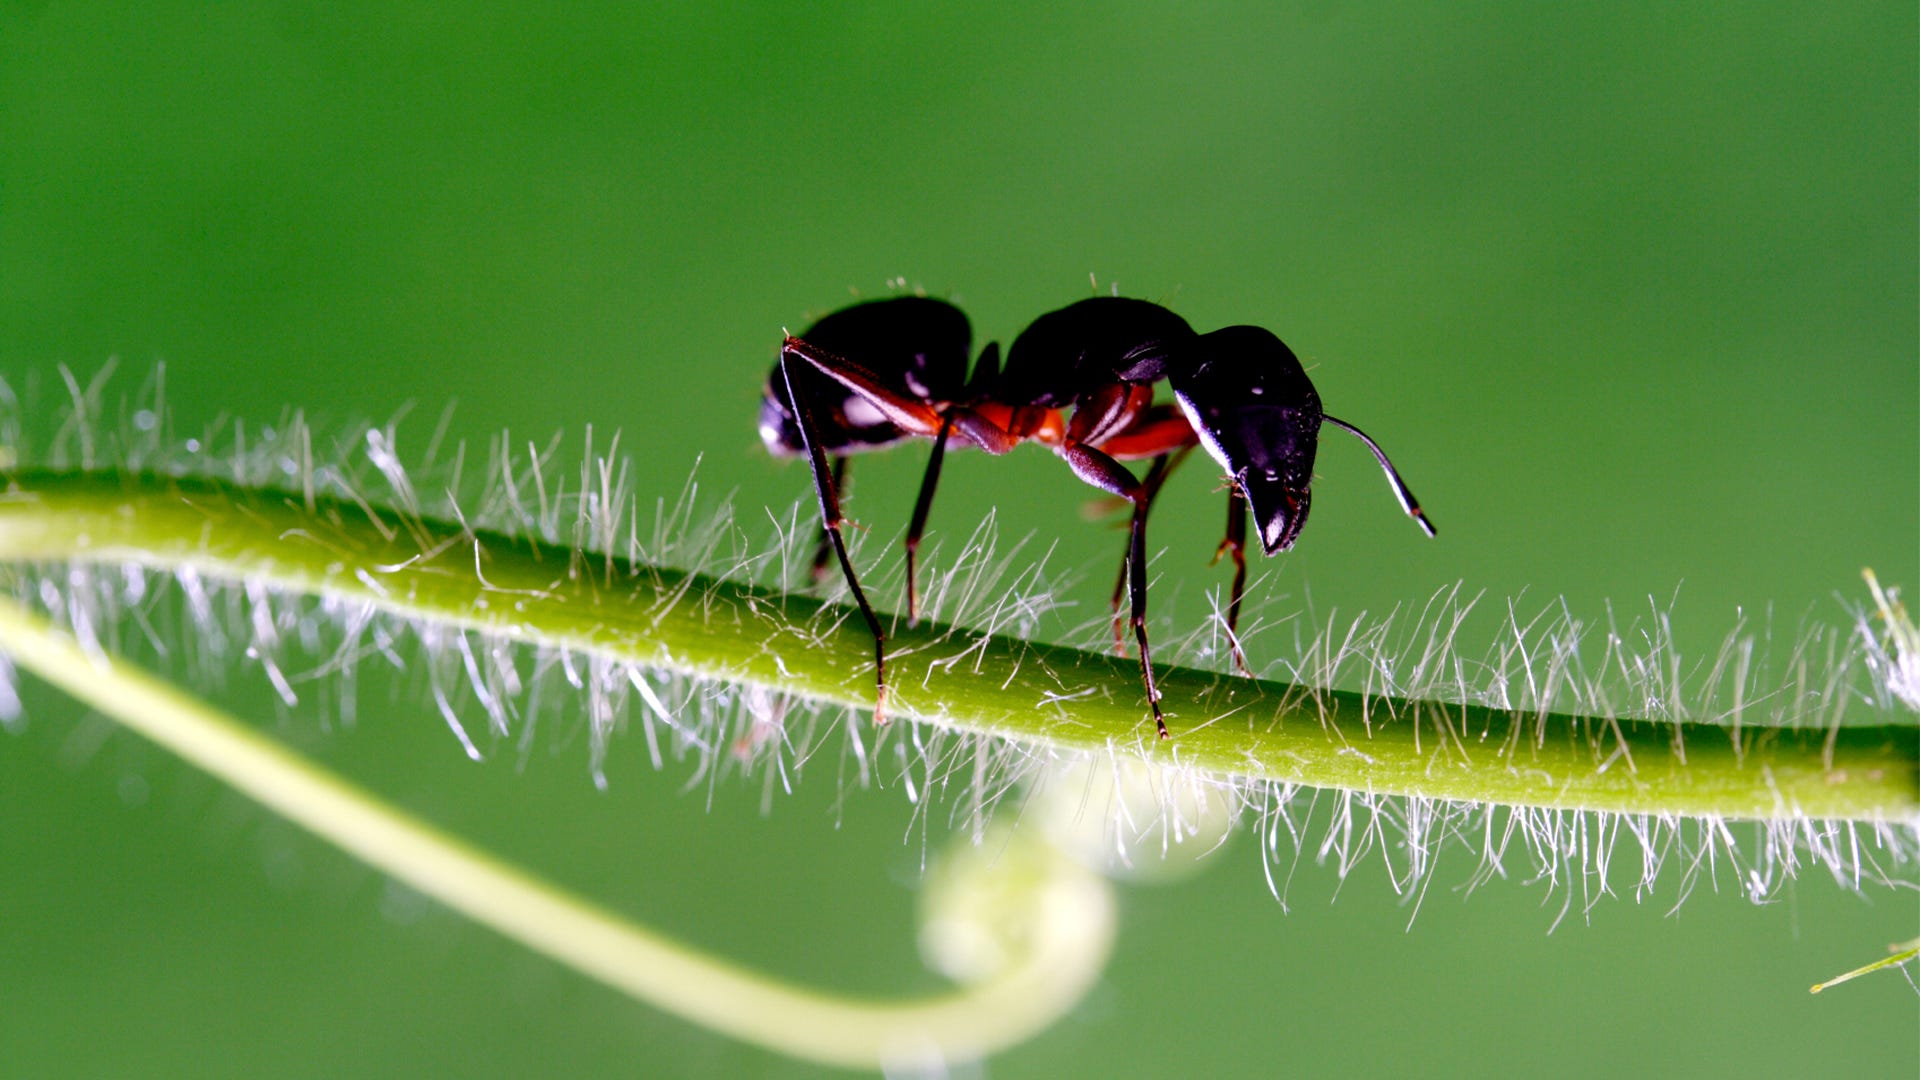 Ant Killer: How to Get Rid of Ants